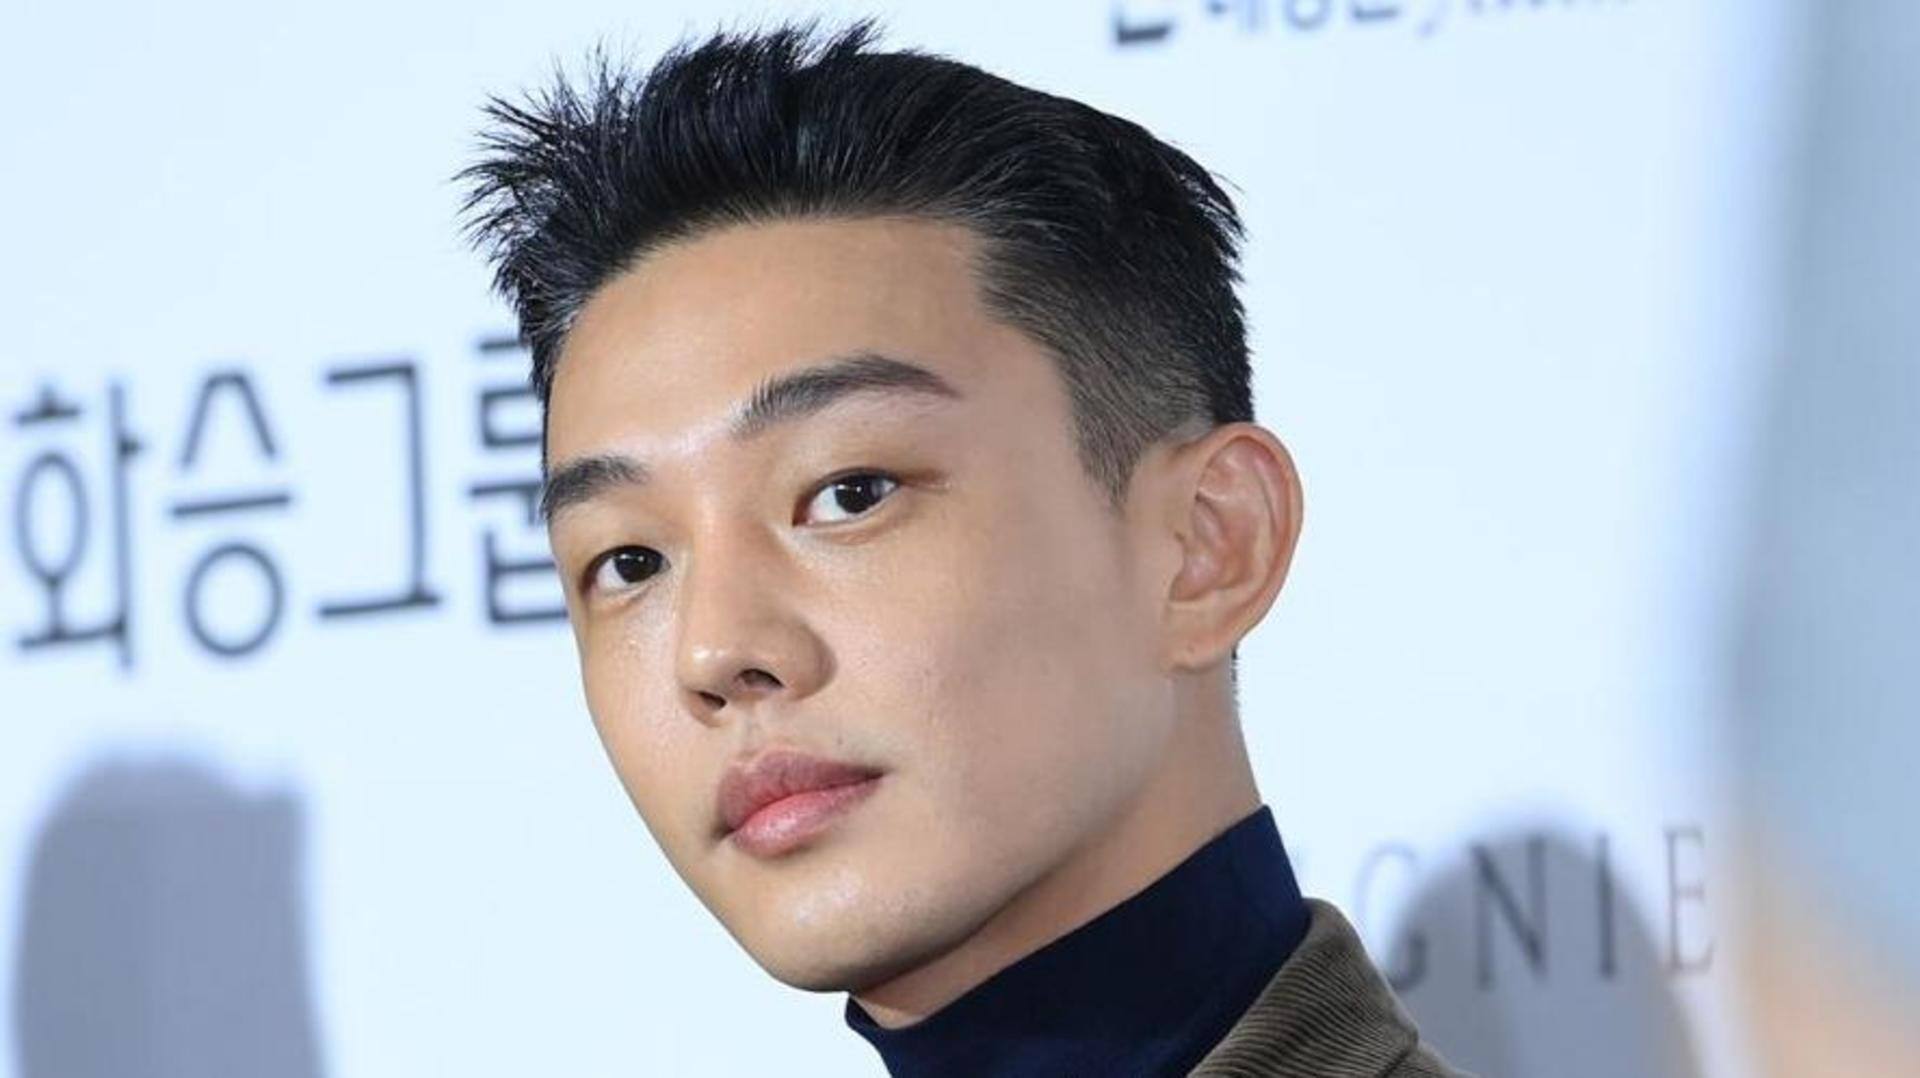 South Korean actor Yoo Ah-in tests positive for propofol